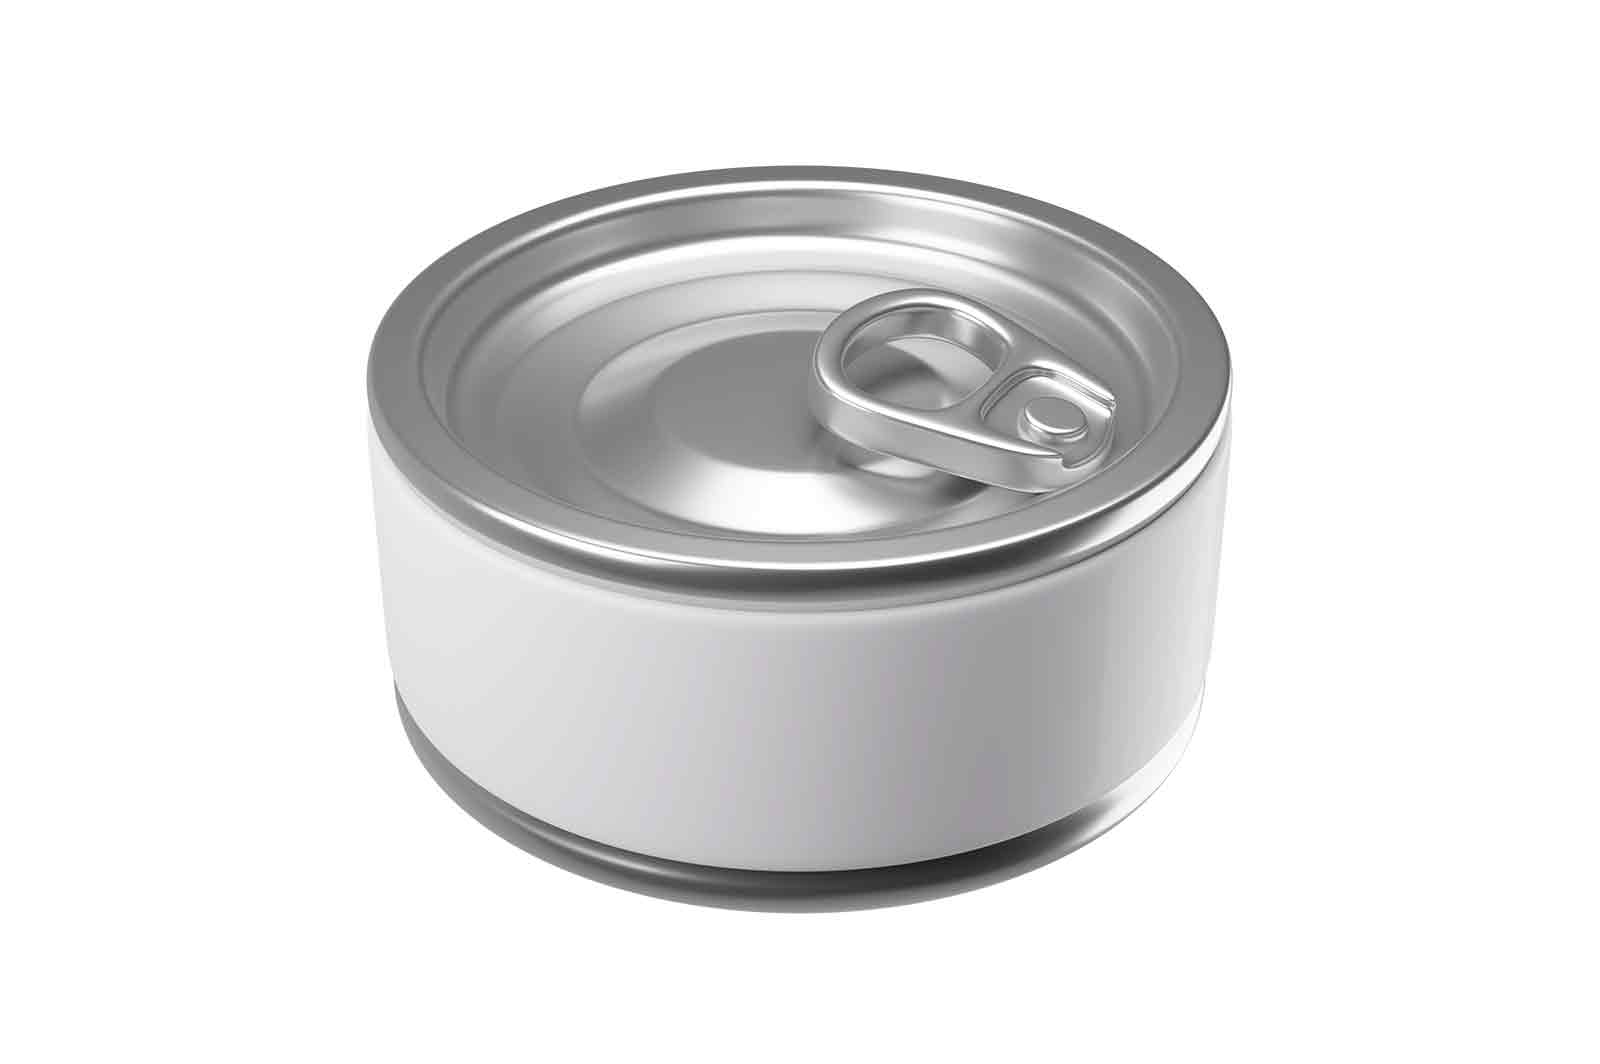 Metal can, 3d rendered illustration of a closed container with a pull-tab lid. The can is silver-colored and round, and has a slight shadow on a white background